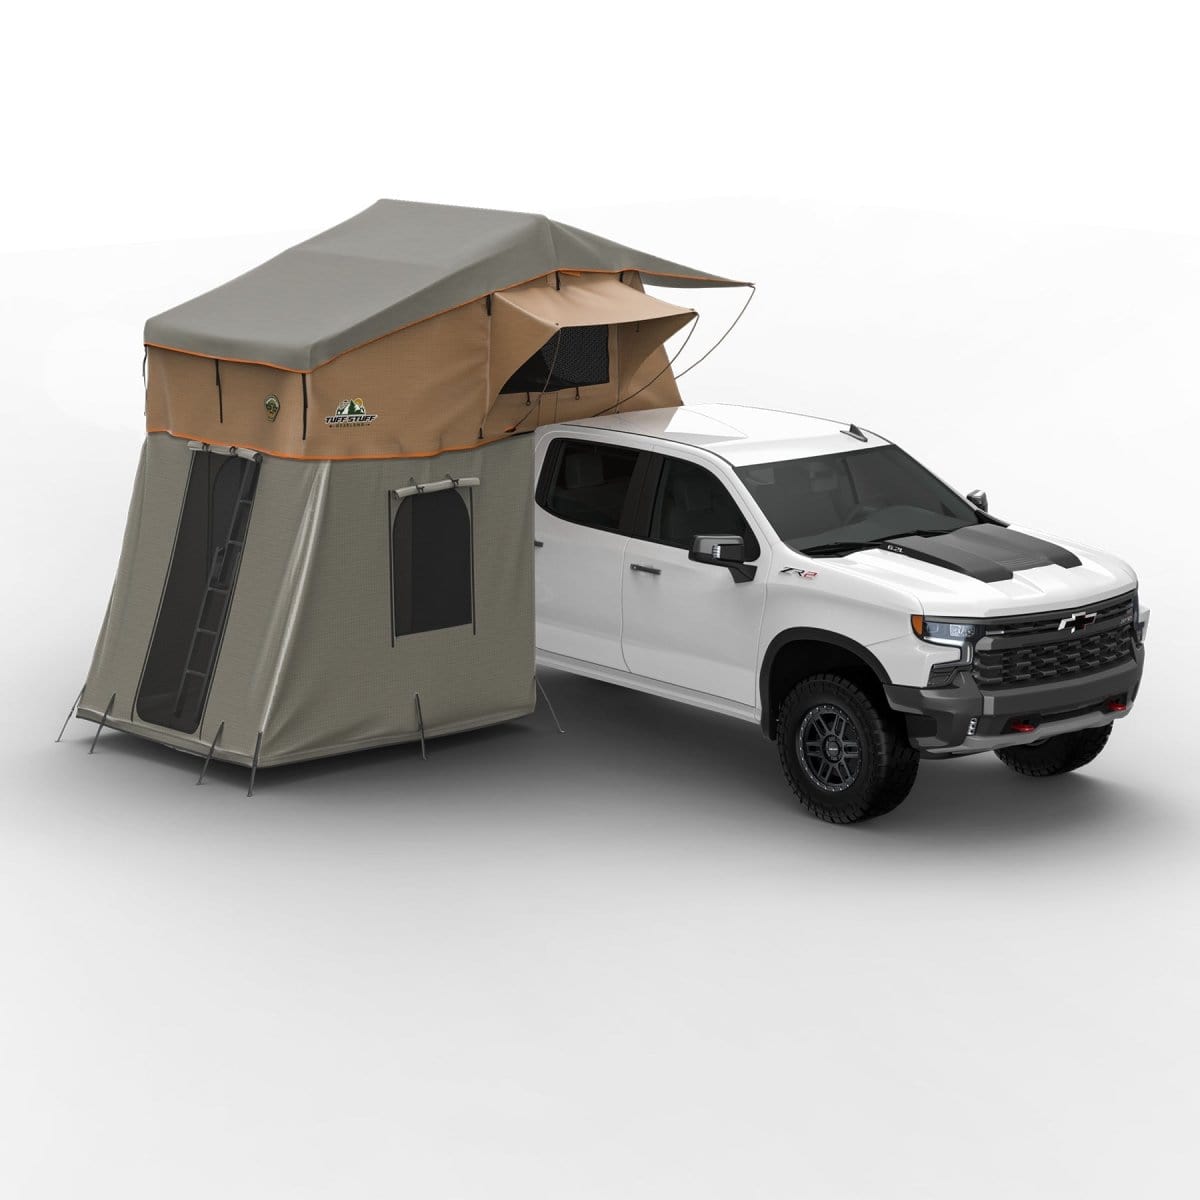 Tuff Stuff Overland Roof Top Tent With Annex Delta Rooftop Tent from Tuff Stuff Overland